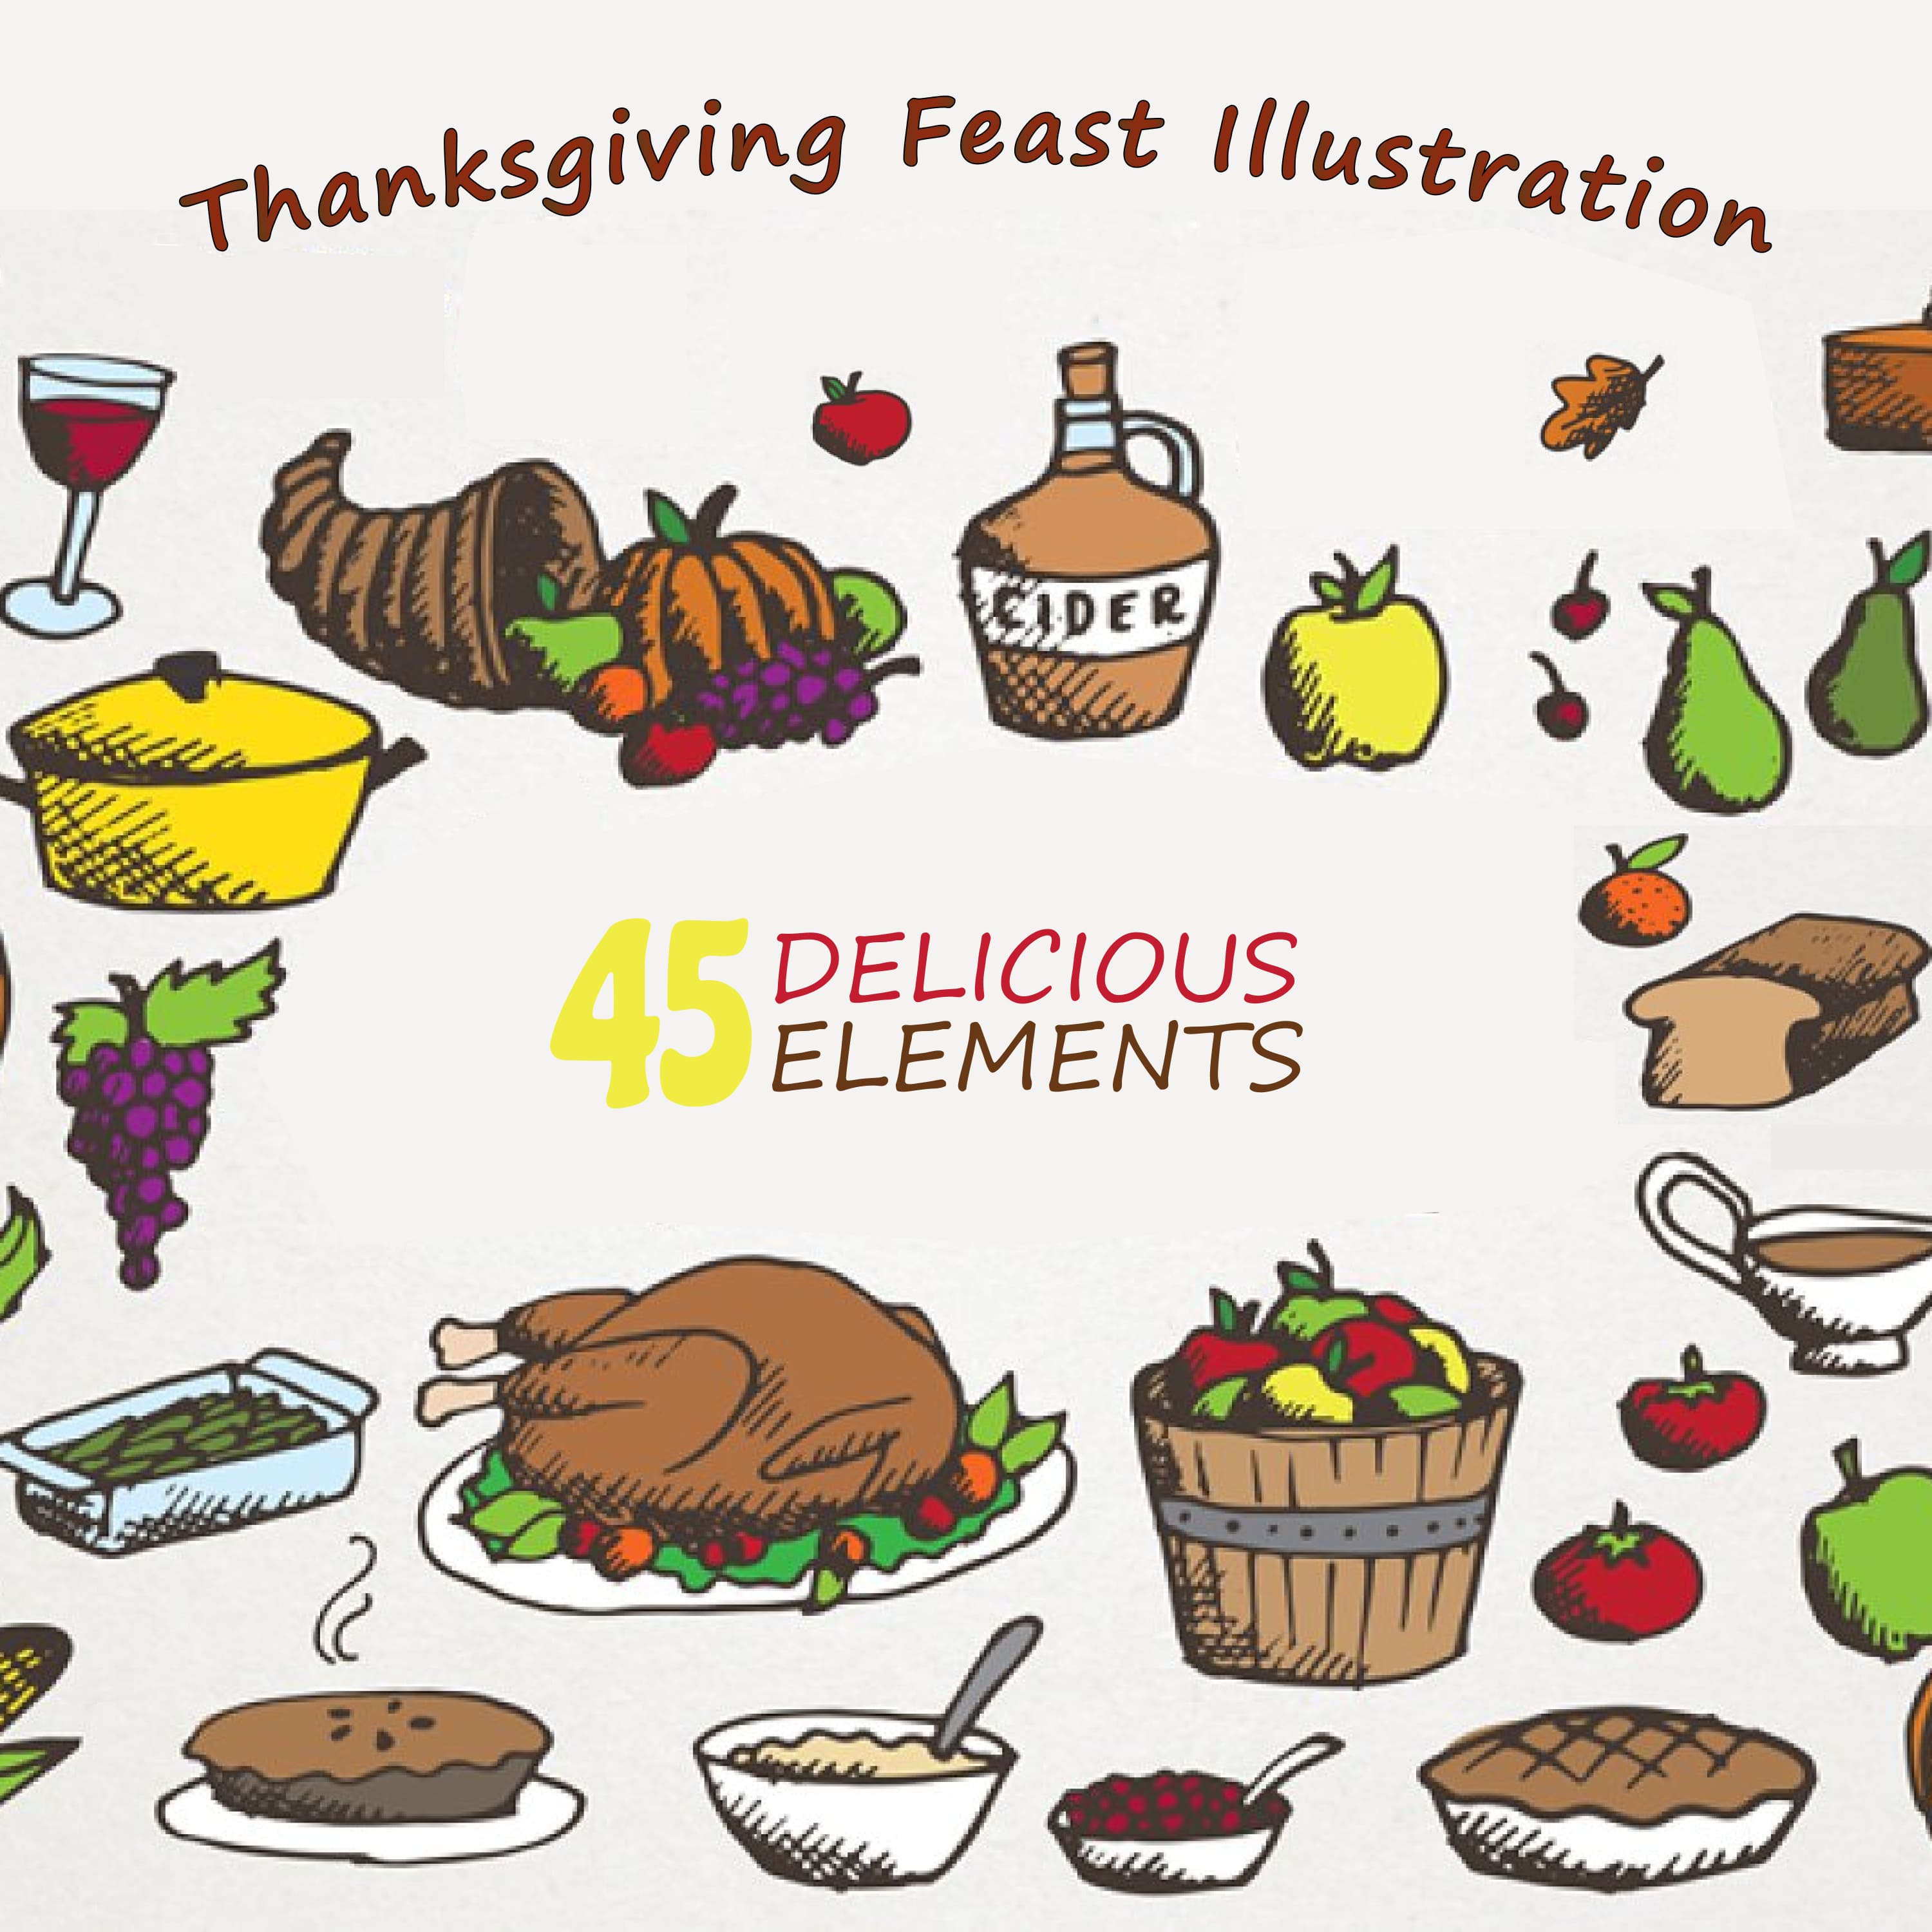 Thanksgiving Feast Illustration Pack cover.